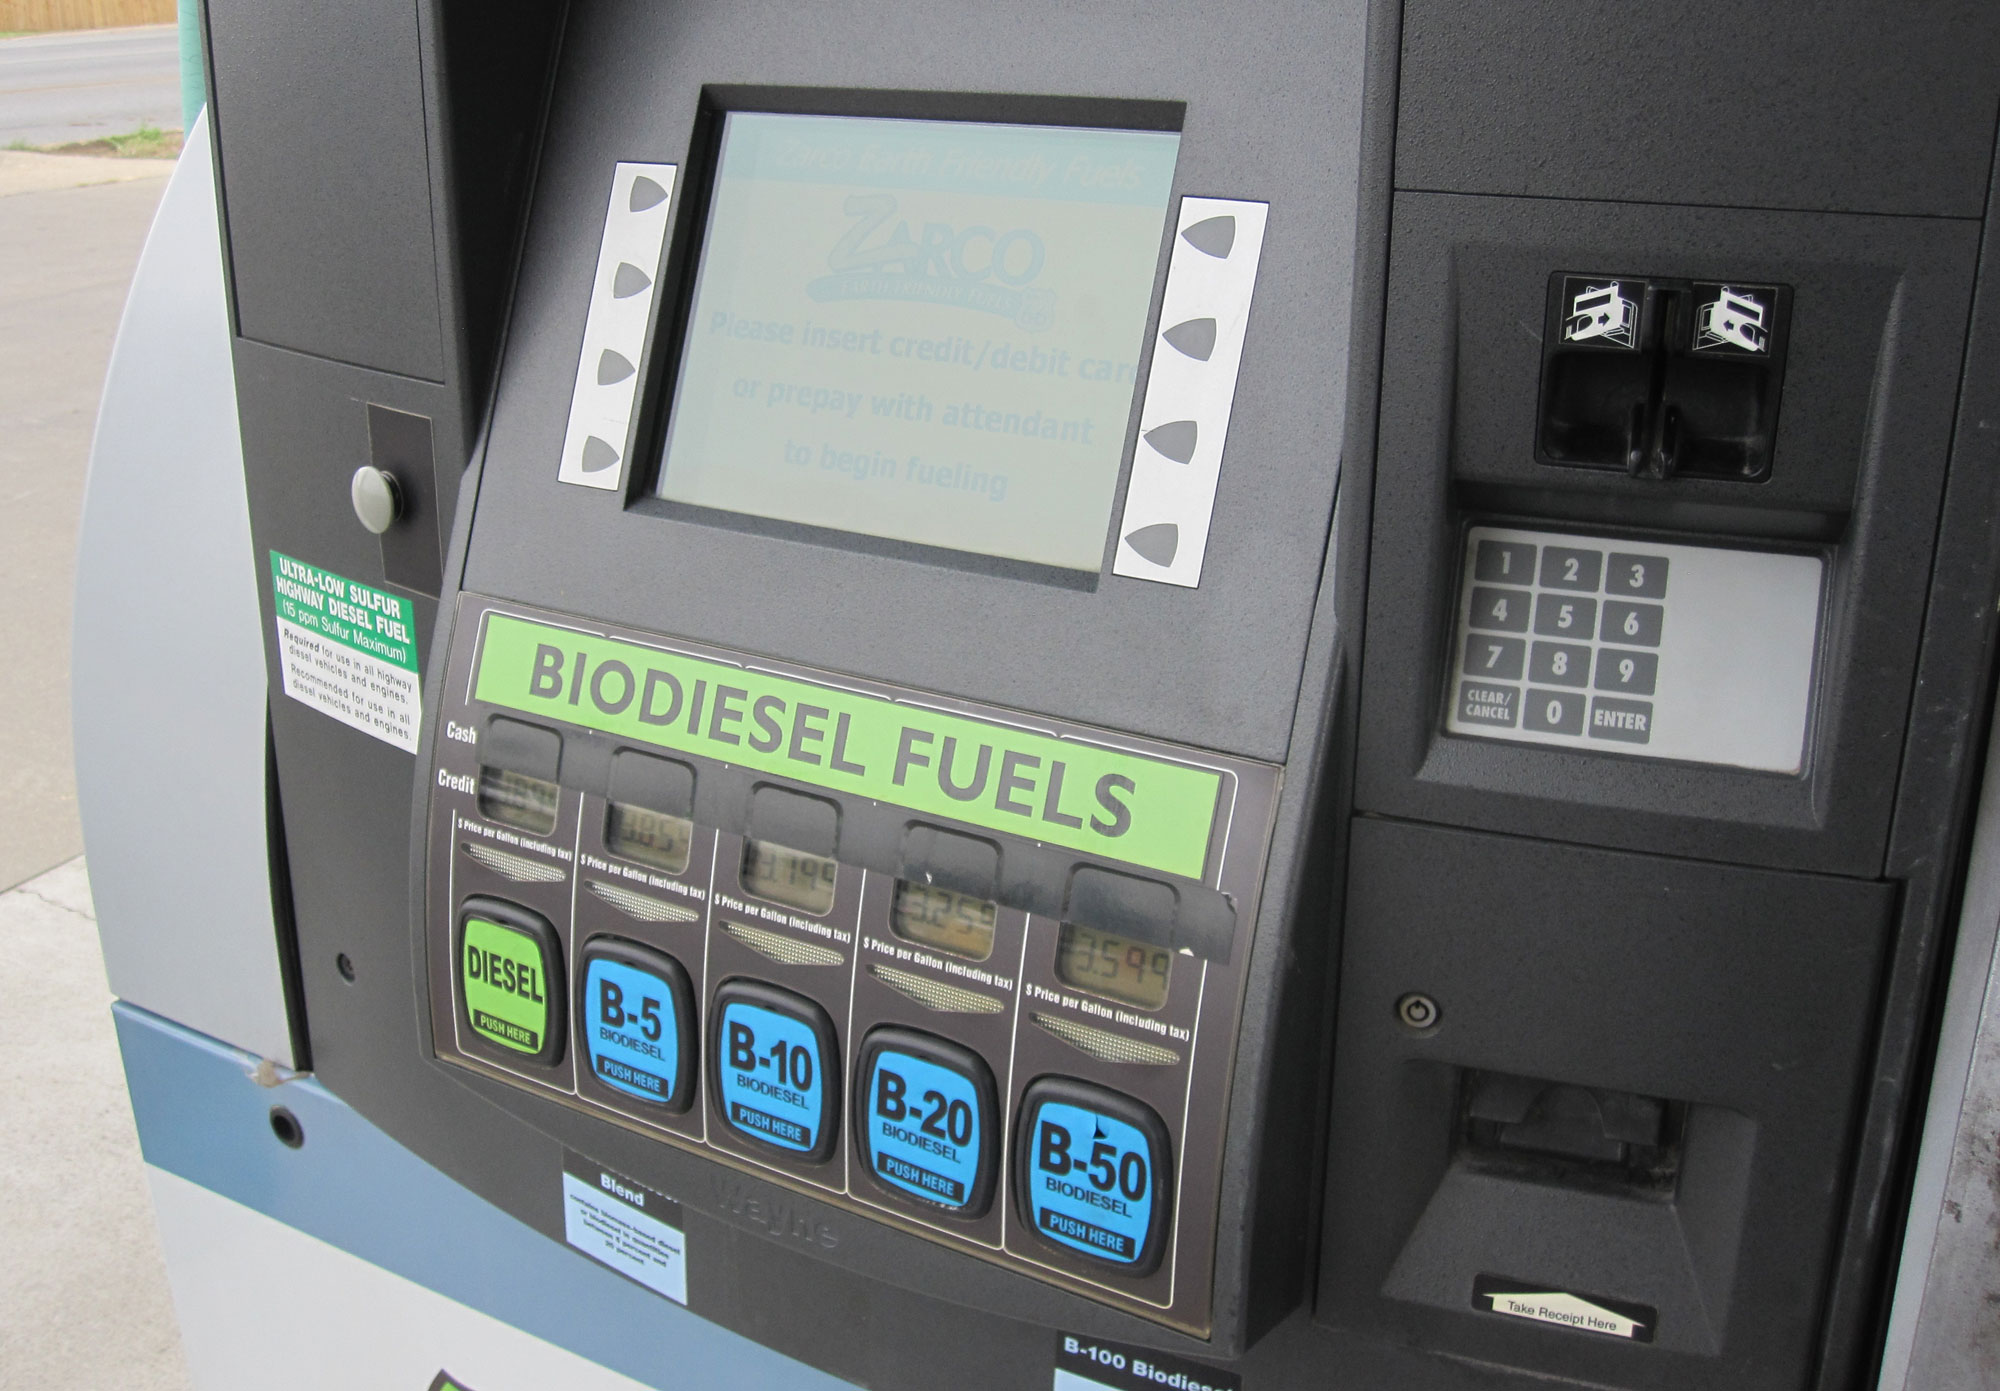 Photograph of a fuel pump that dispenses biodiesel fuels. The buttons on the pump say "diesel,", "B-5," "B-10," "B-20," and "B-50."